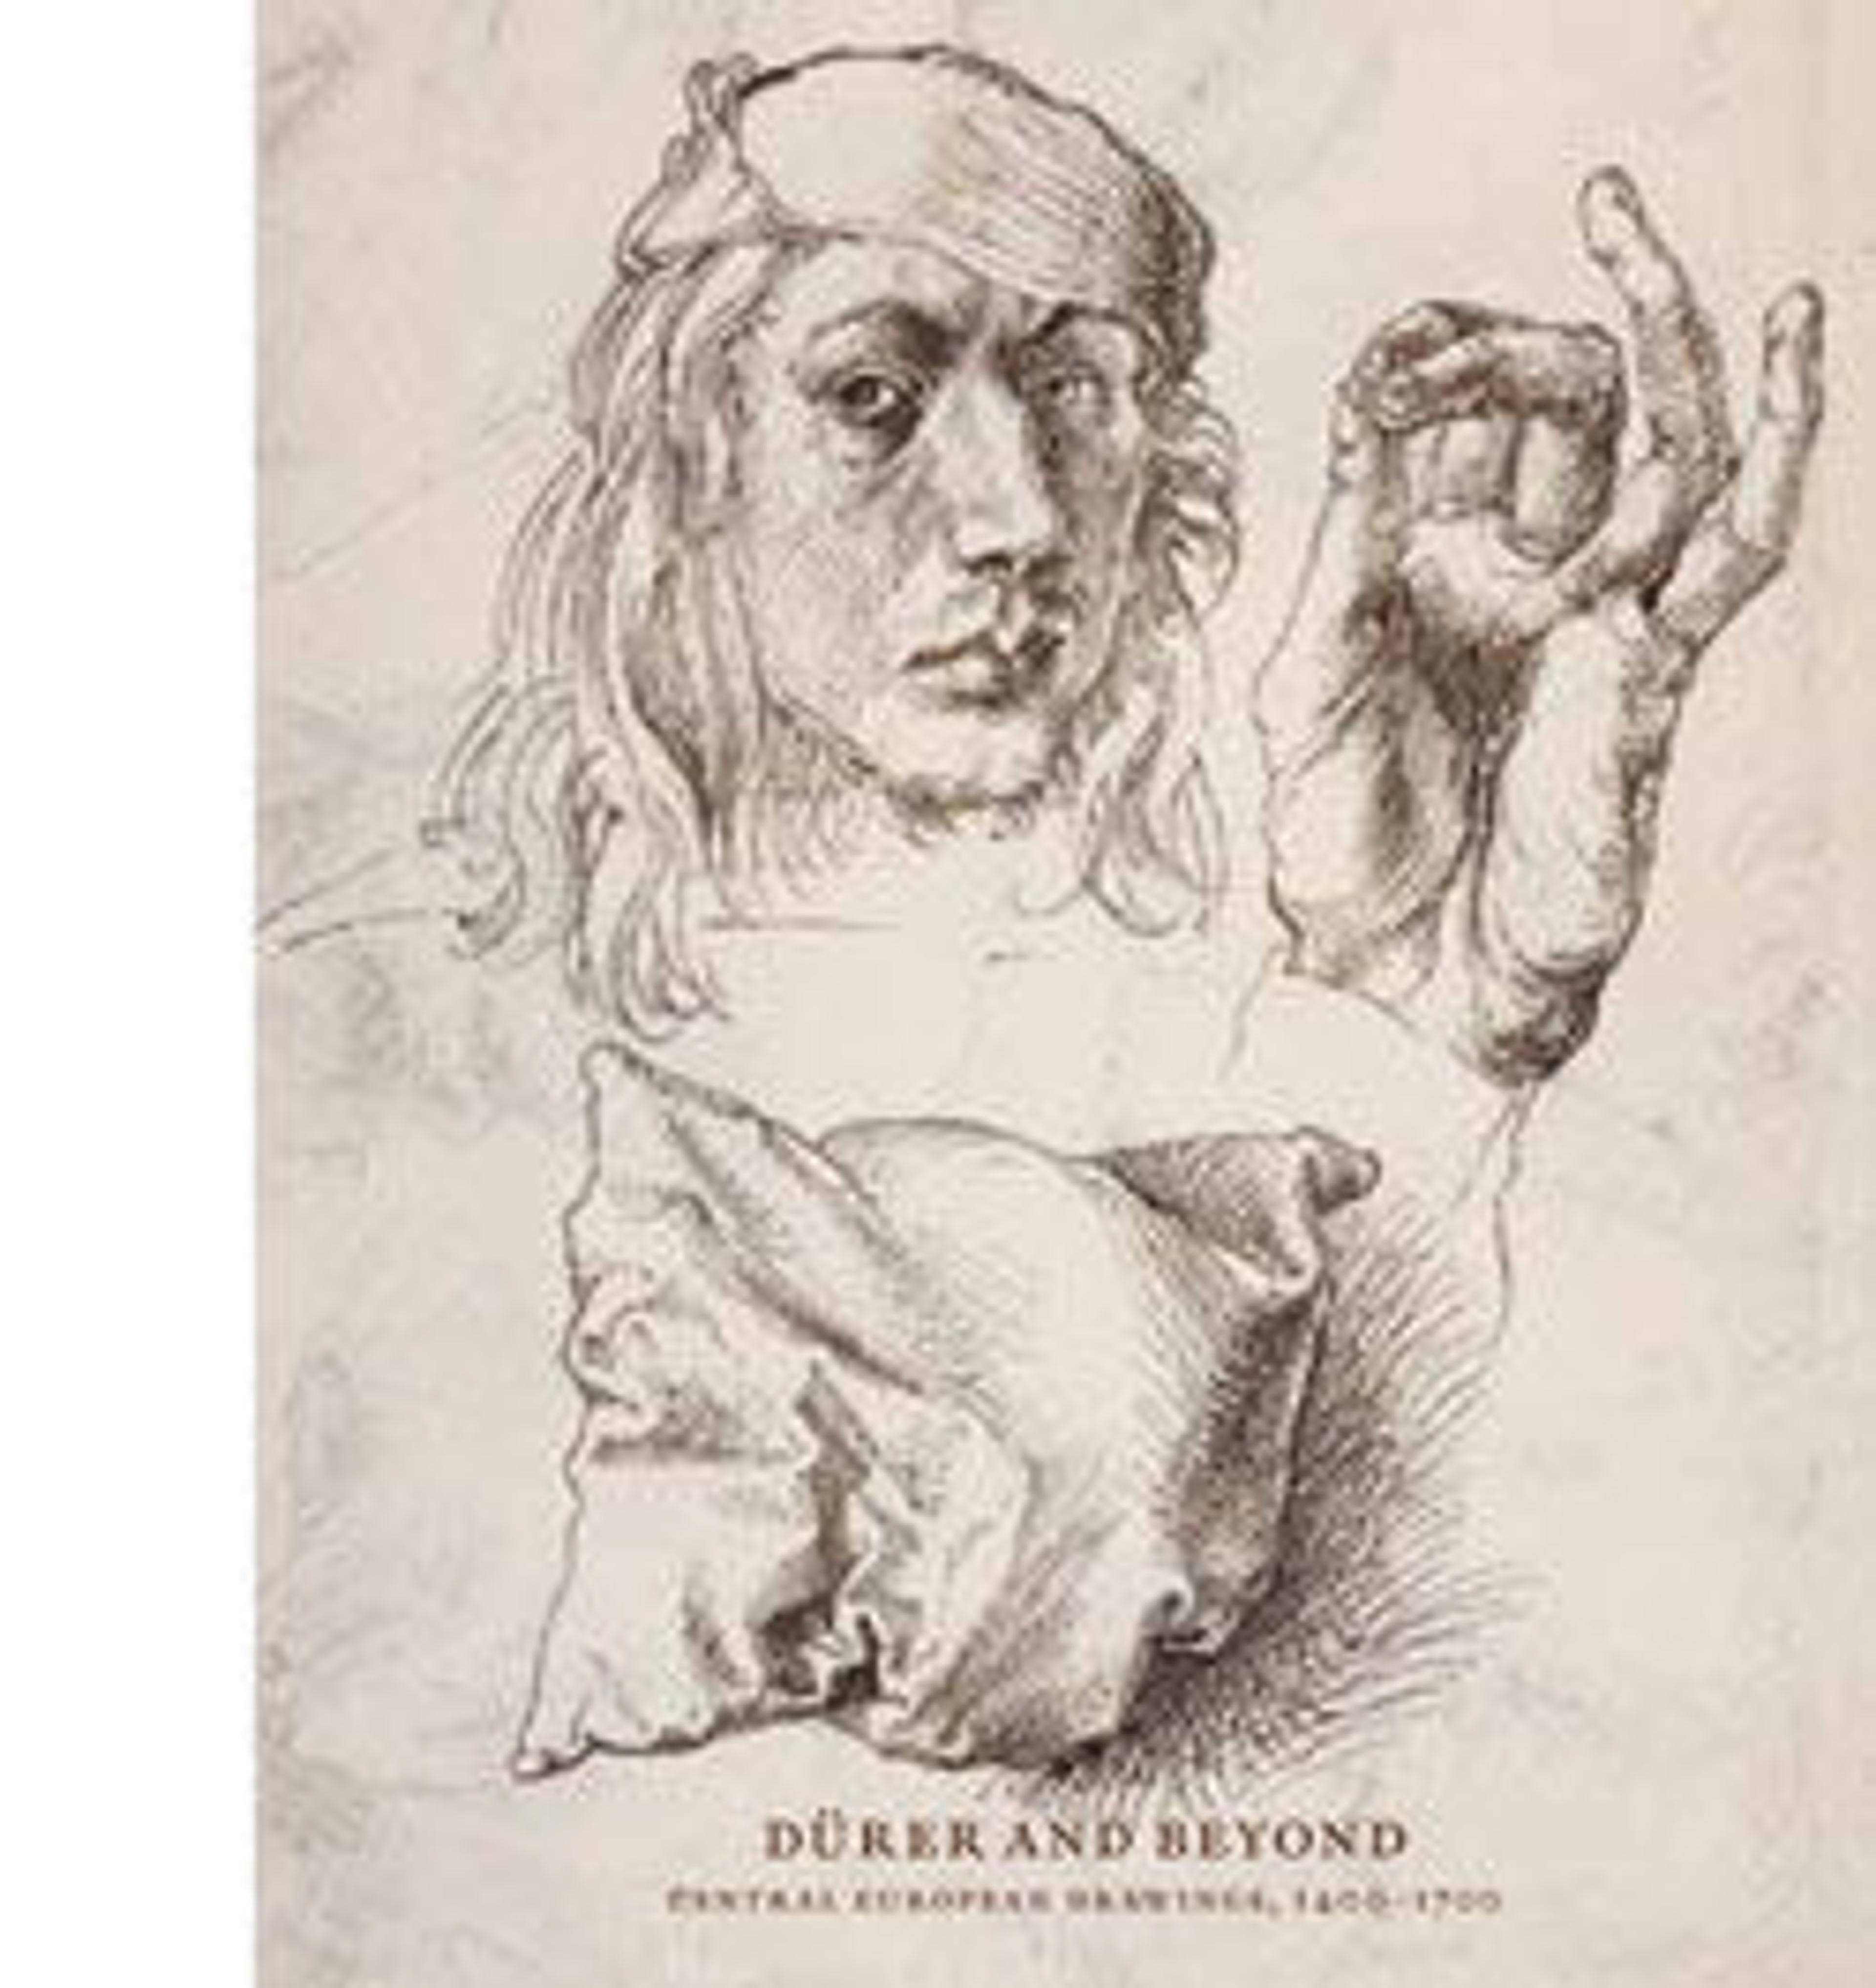 Durer and Beyond: Central European Drawings, 1400-1700